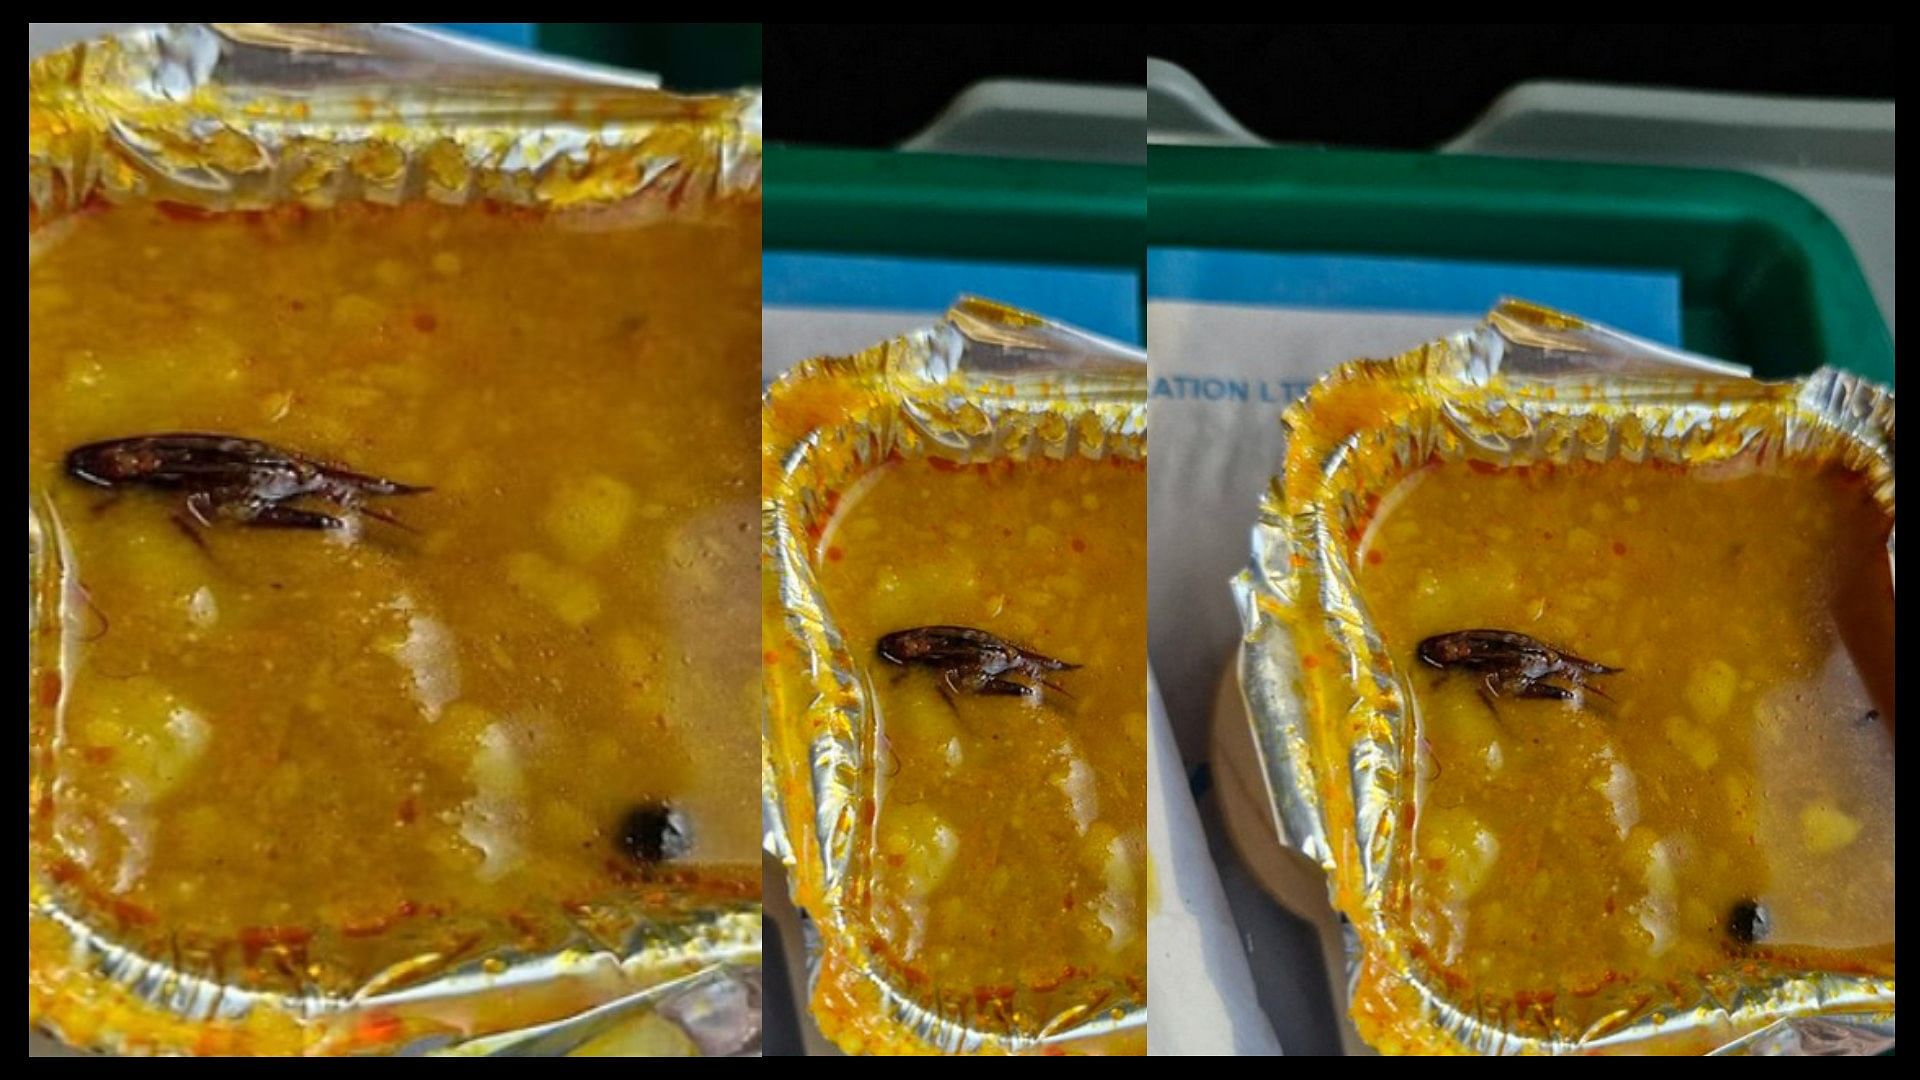 Cockroach found in food of Vande bharat express video goes viral on social media